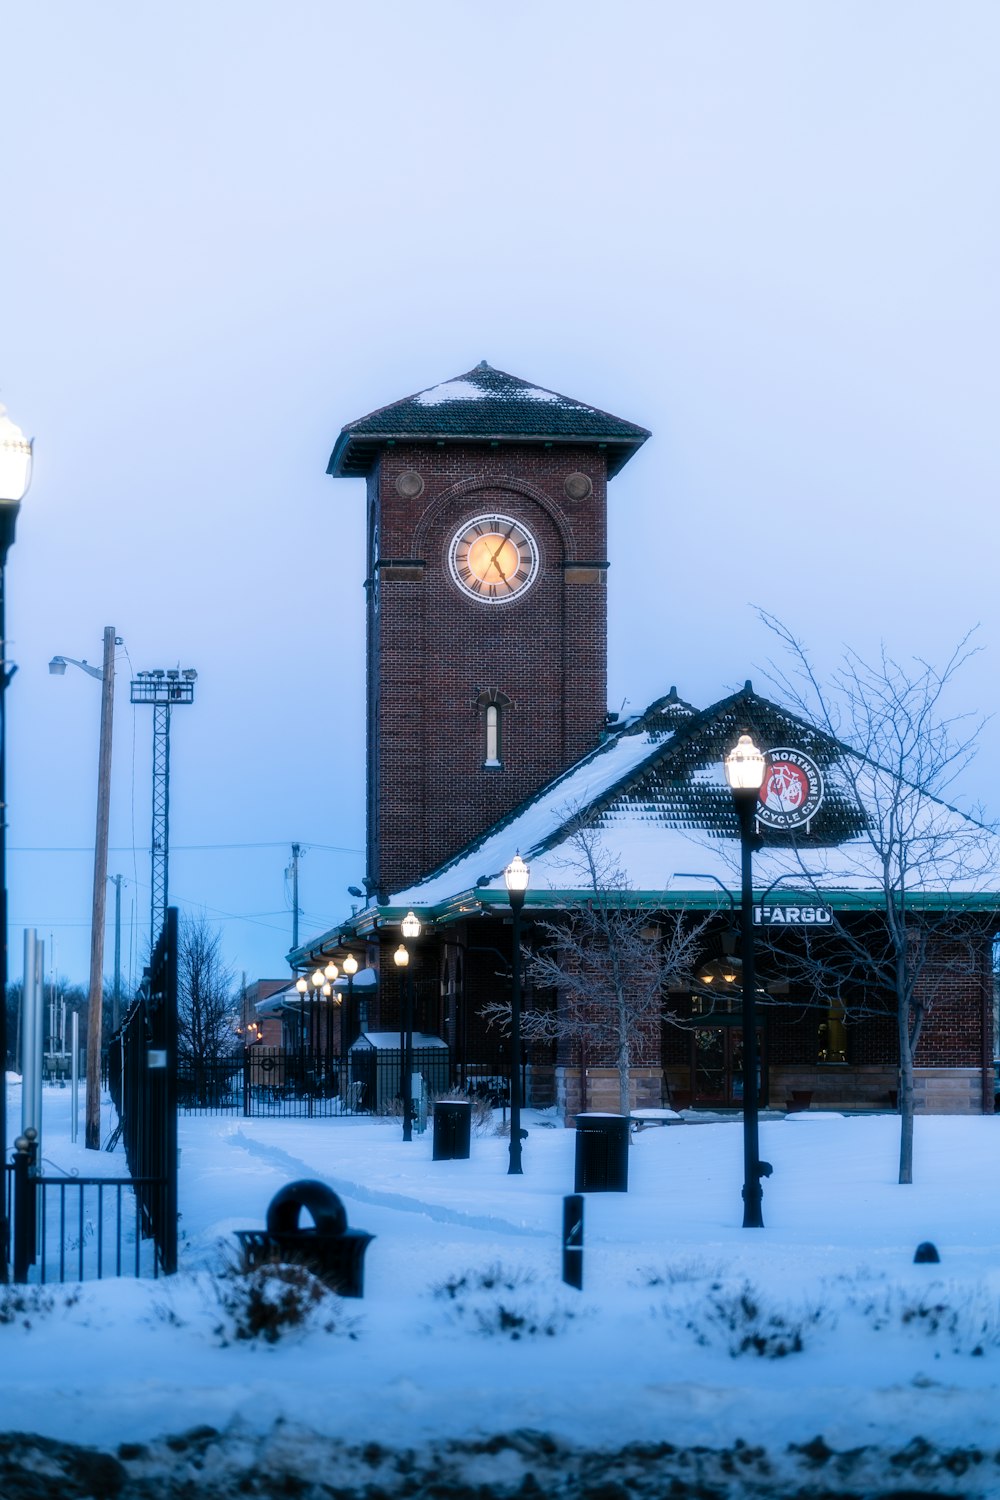 a clock tower in the middle of a snowy street